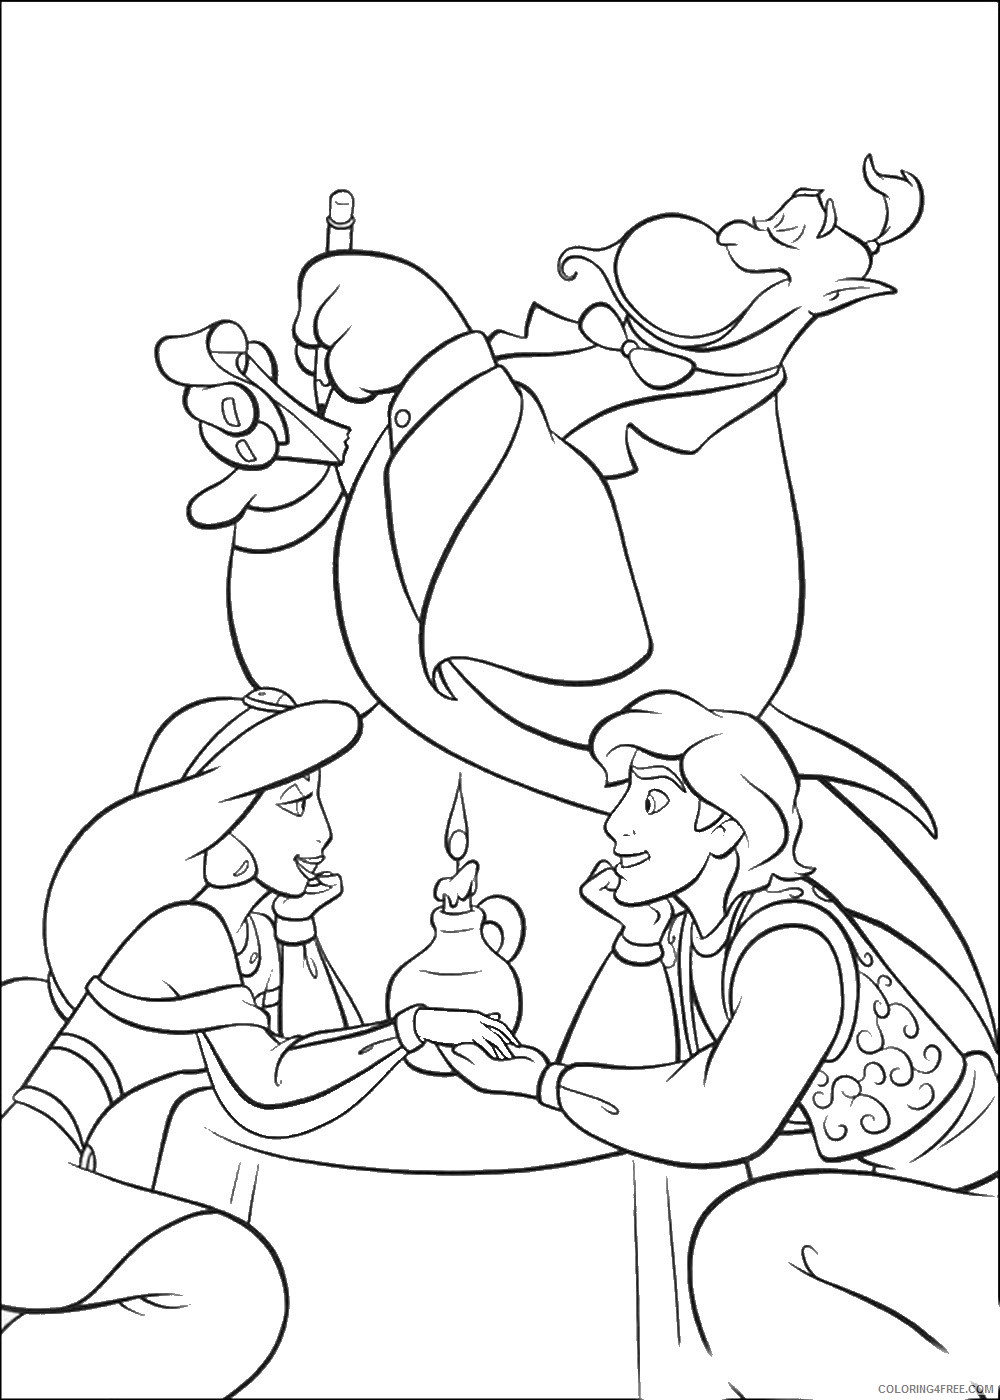 Aladdin Coloring Pages Cartoons aladdin_02 Printable 2020 0282 Coloring4free